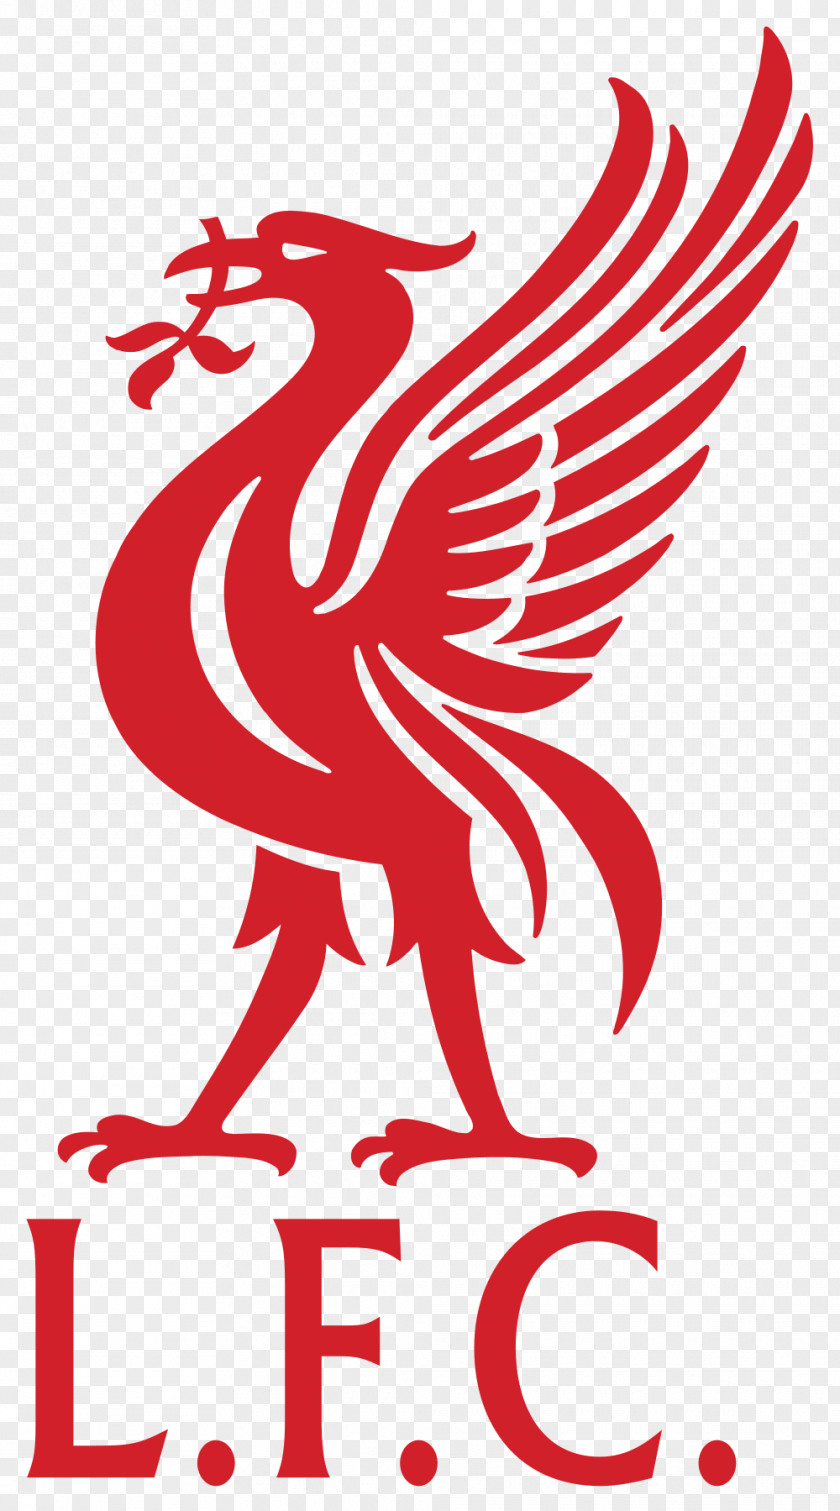 Liver Liverpool F.C. Anfield Bird Logo FA Cup PNG